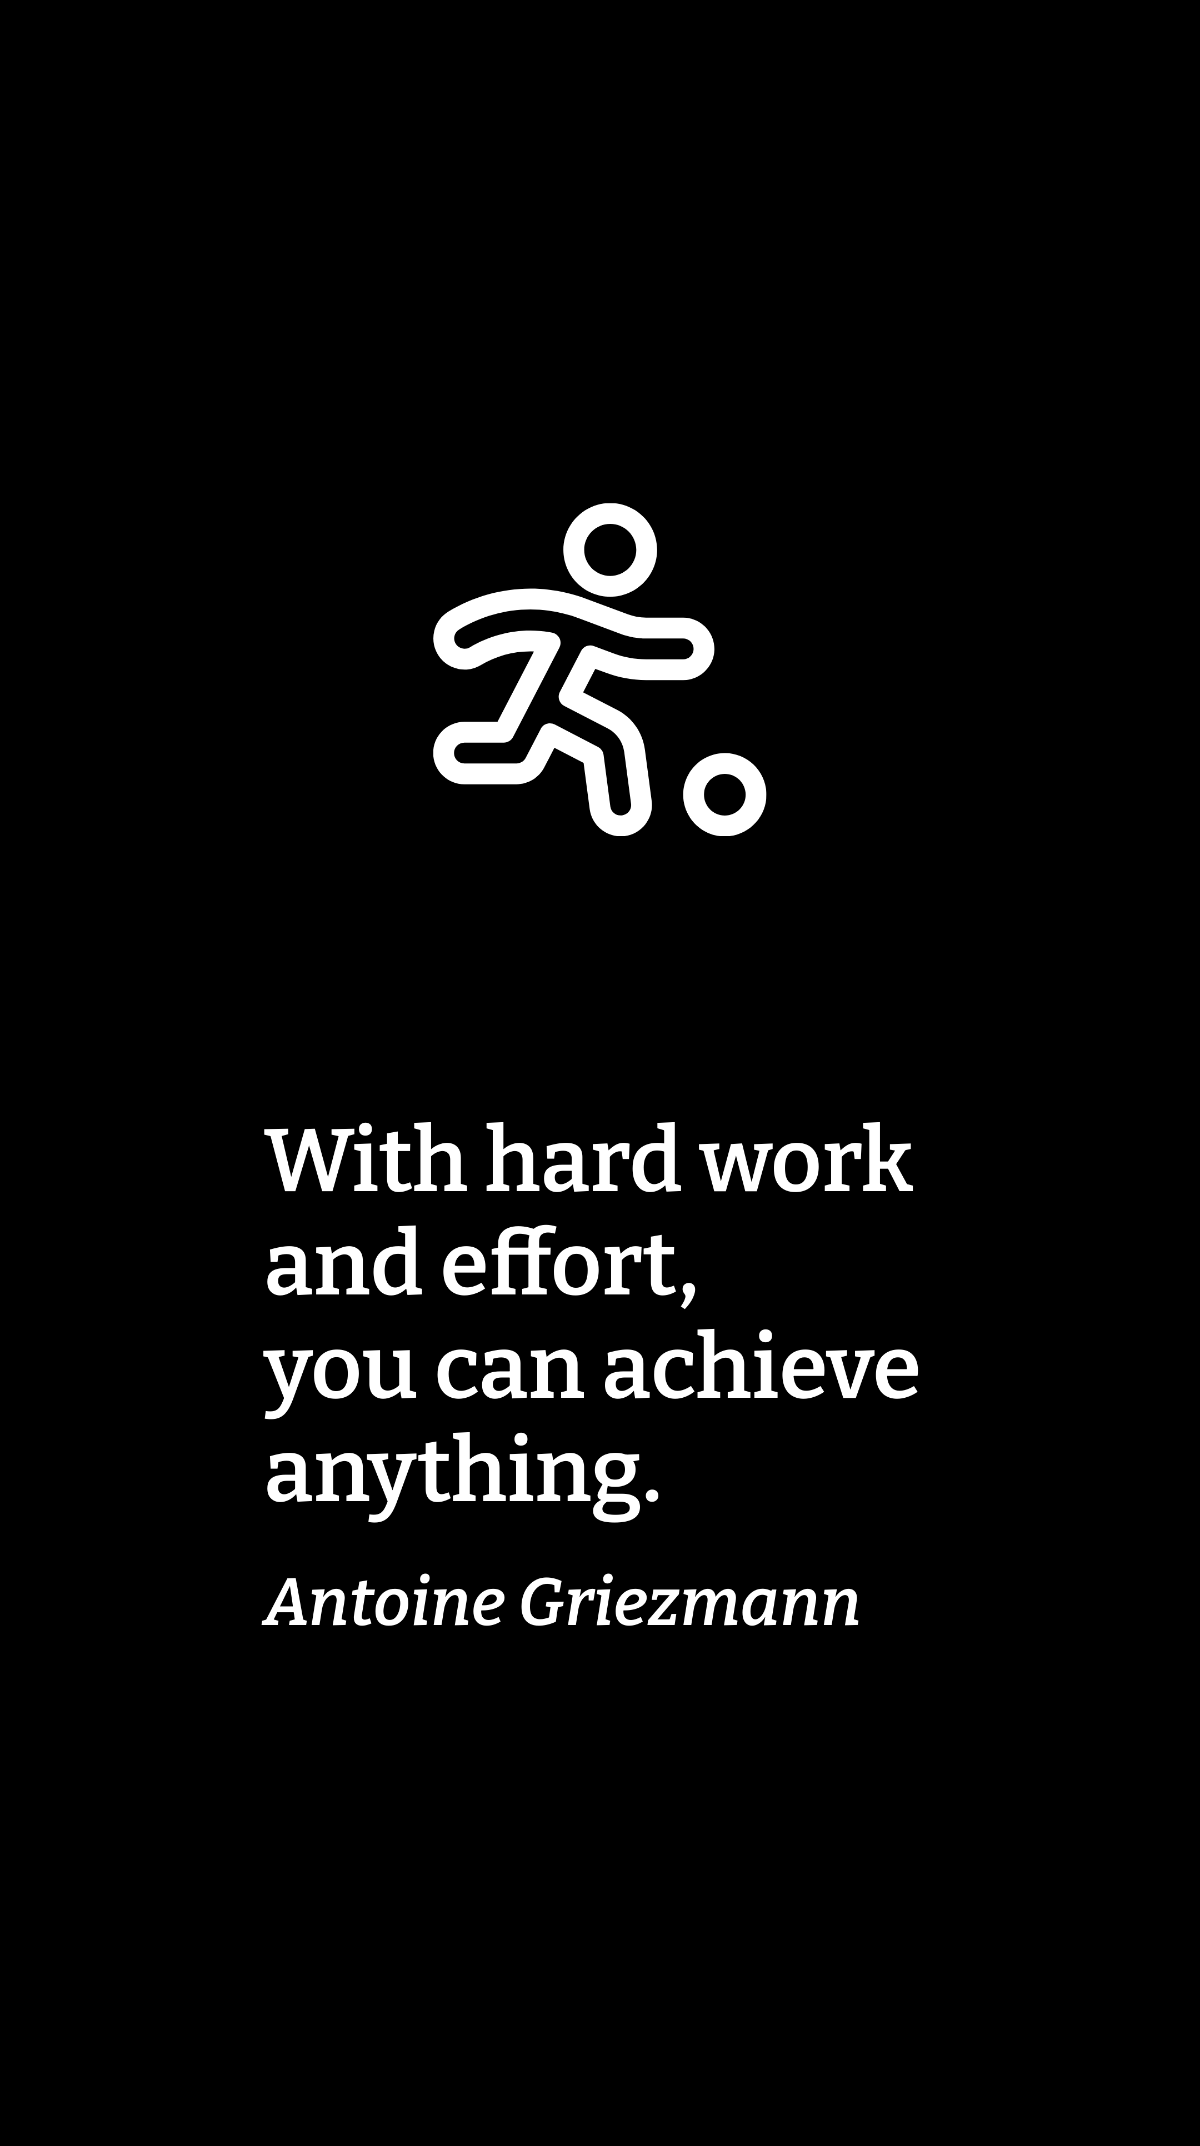 Antoine Griezmann - With hard work and effort, you can achieve anything.